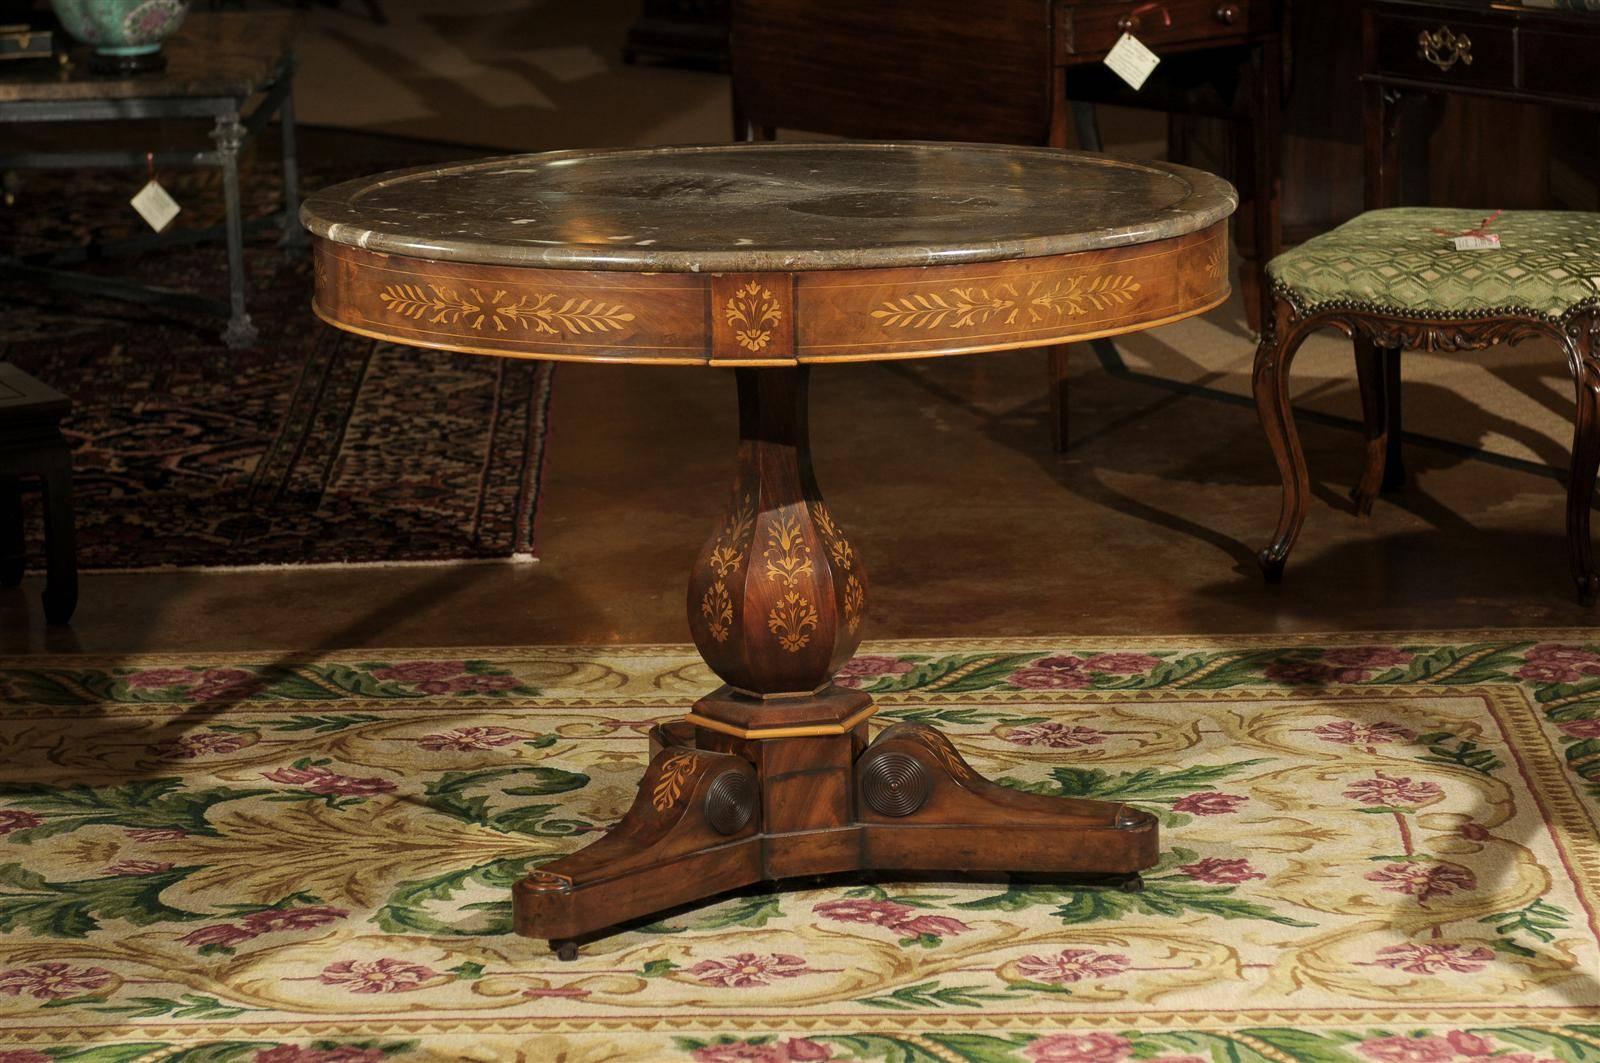 A very beautiful mahogany Charles X gueridon table with original multi brown and white veined marble-top. The table has marquetry inlay around the apron and the base. The top is supported by a pillar and tripod legs with inlay and carving.


